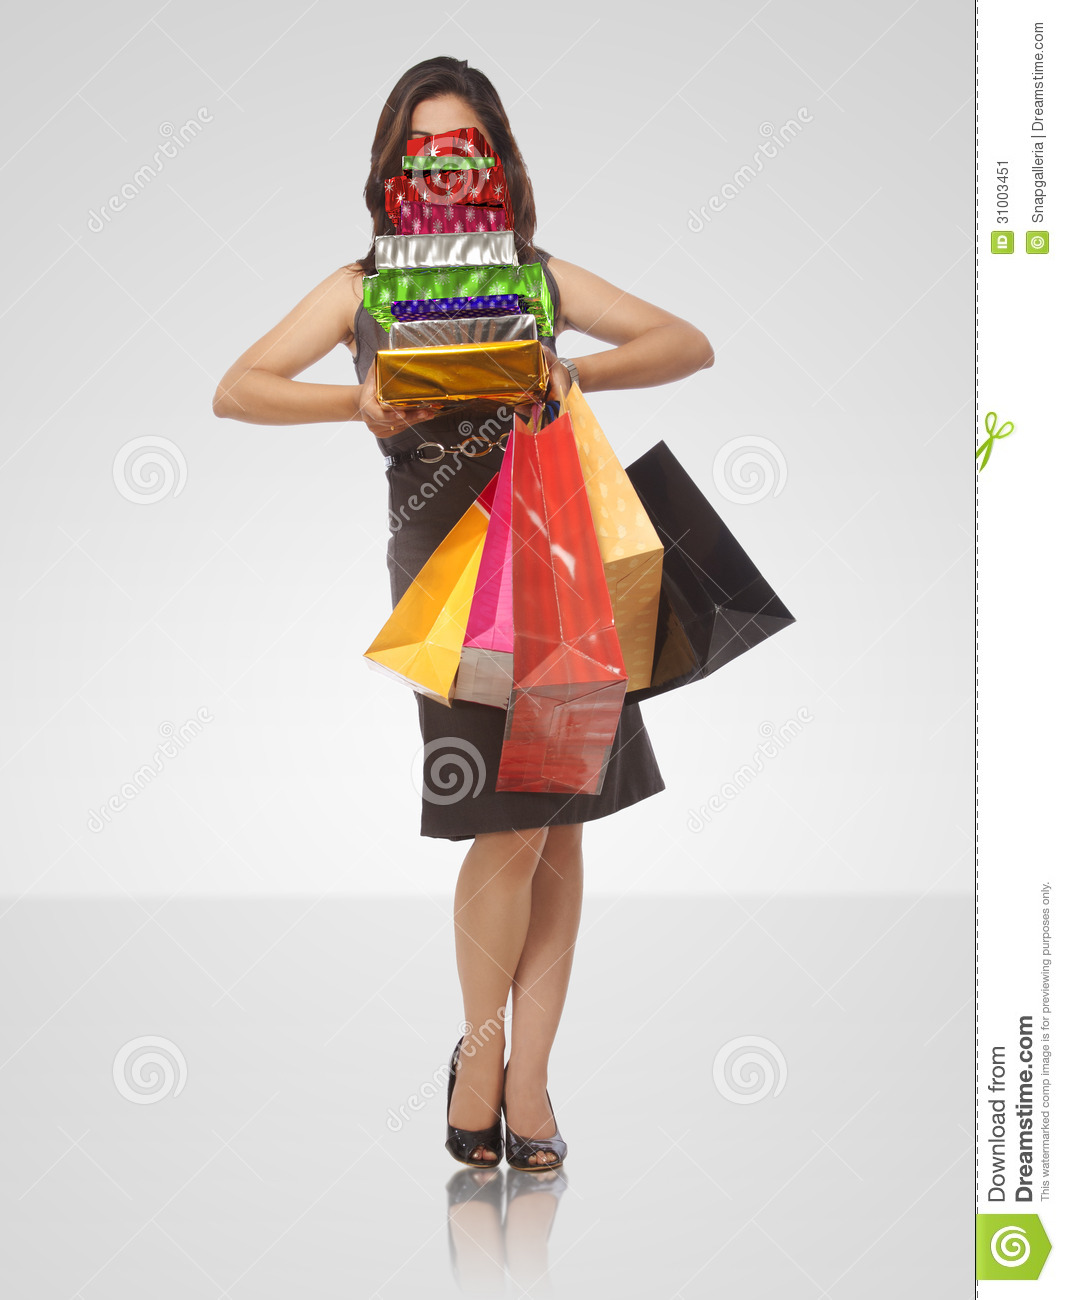 Young Lady With Shopping Bags Stock Image   Image  31003451